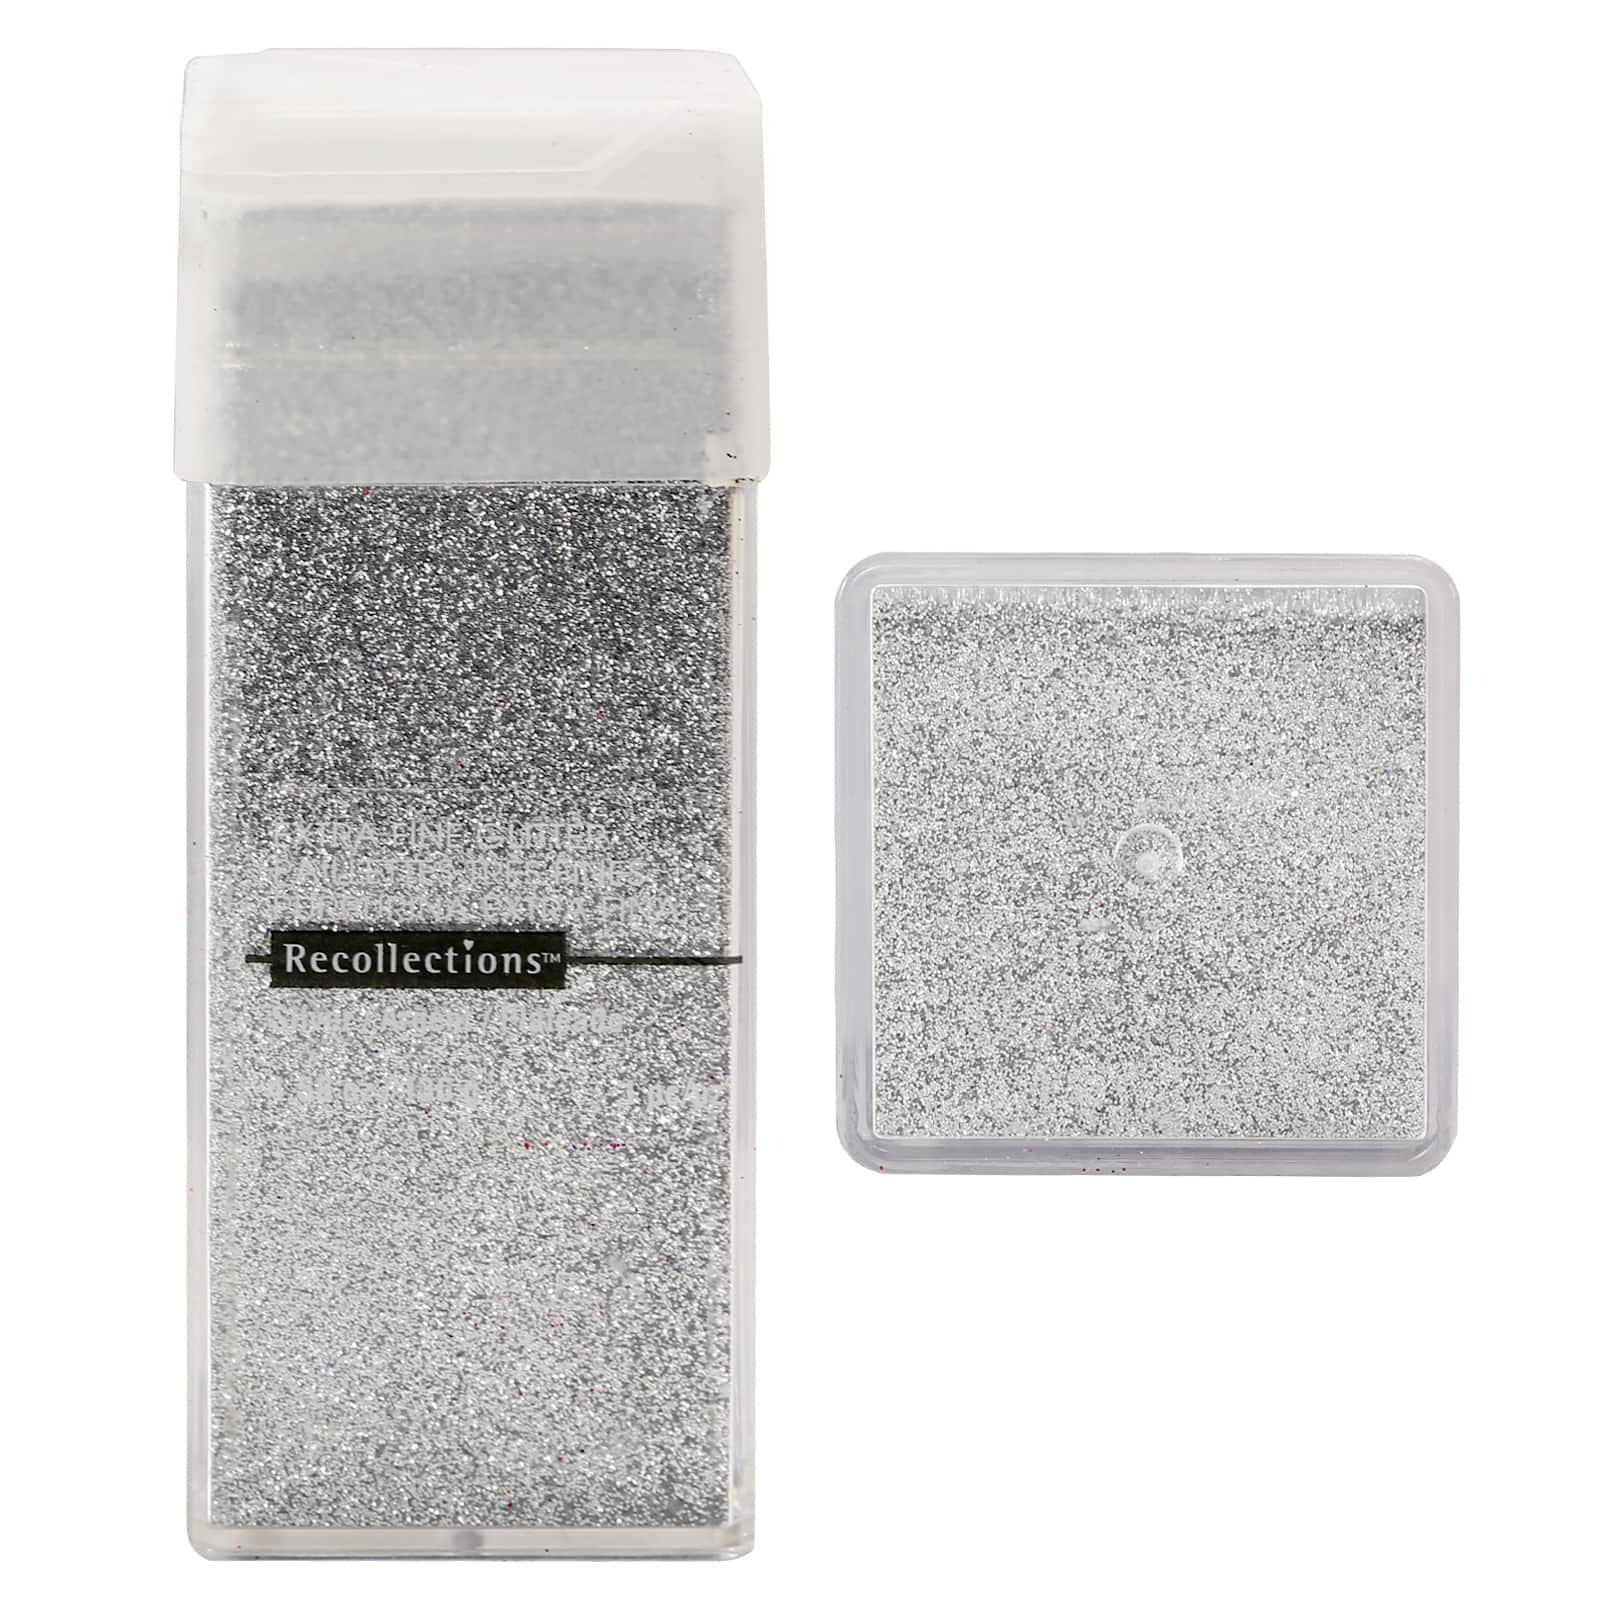 Recollections Signature Extra Fine Glitter - 5 oz